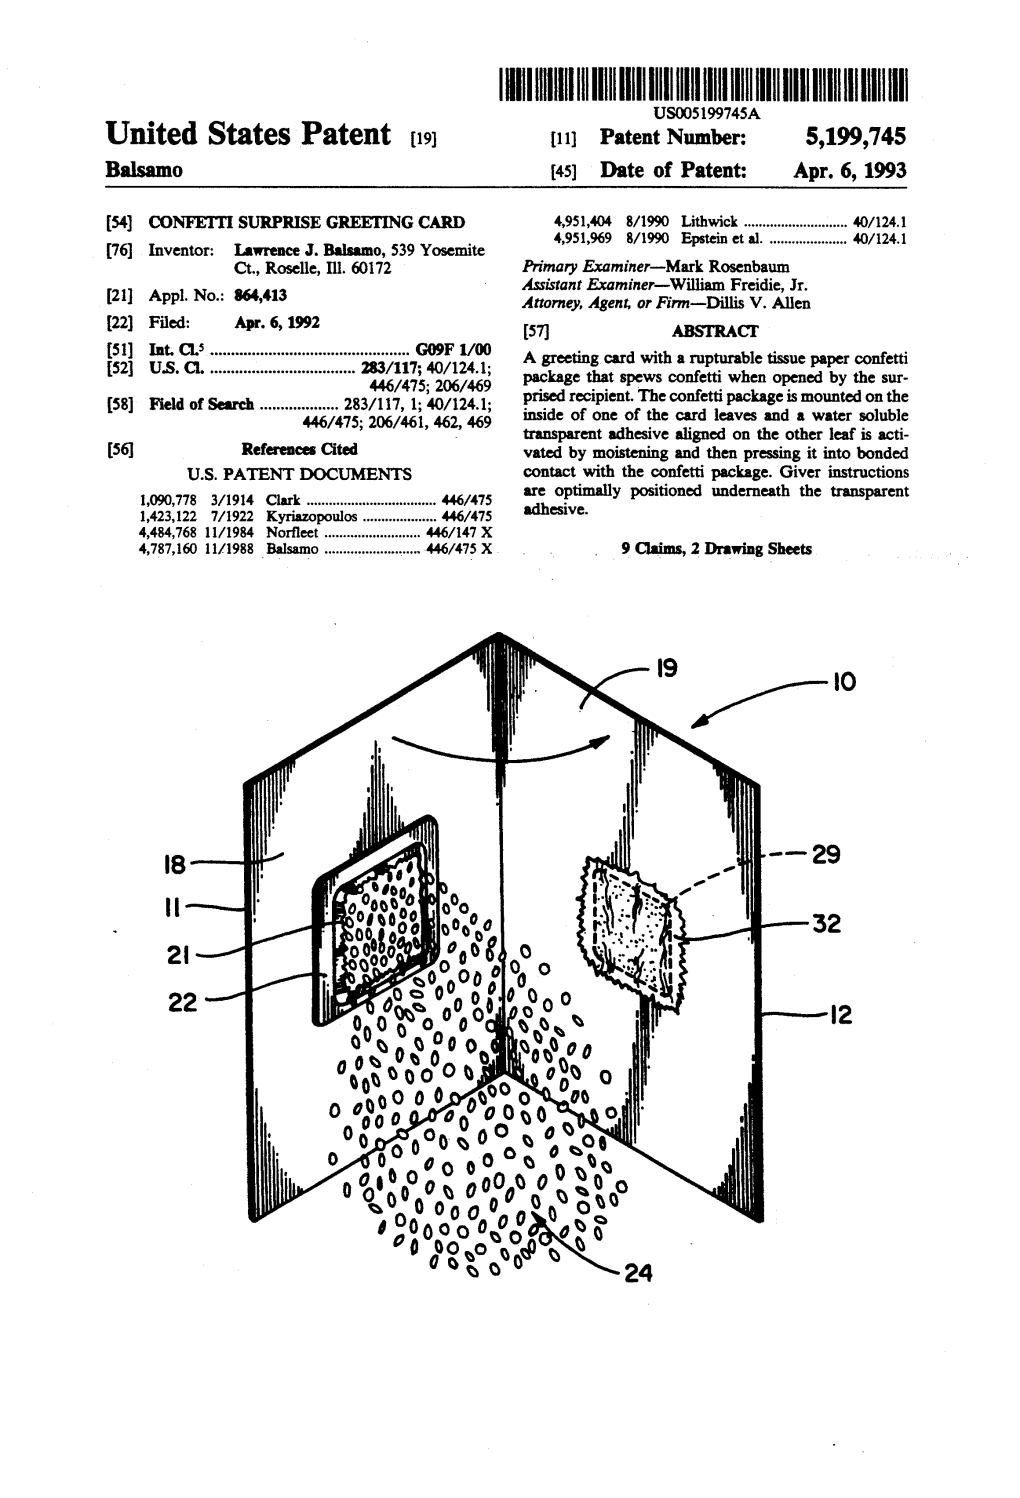 United States Patent (19) 11 Patent Number: 5,199,745 Balsamo 45 Date of Patent: Apr